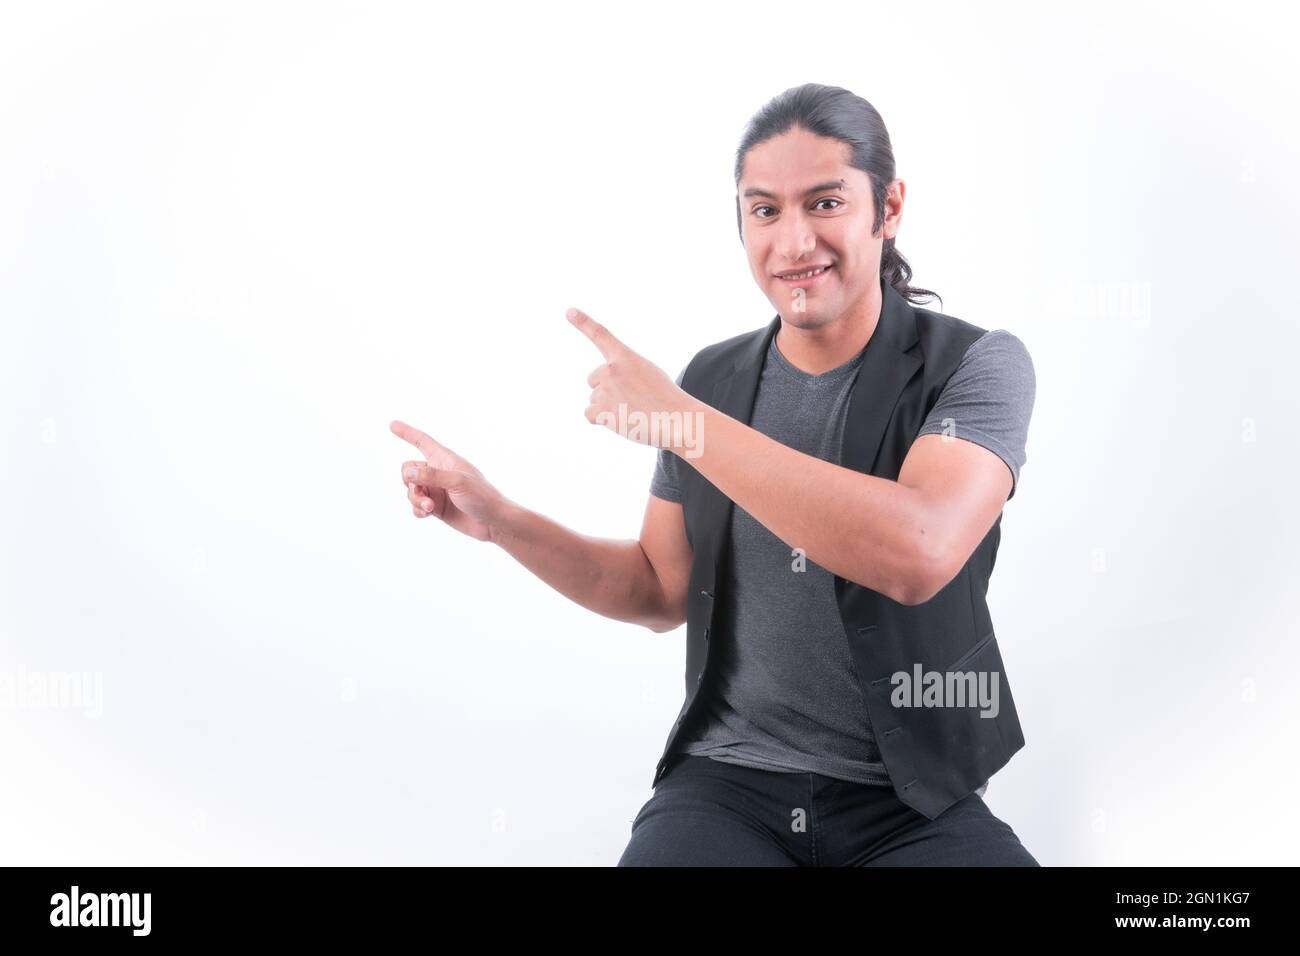 Person with white background, man gesturing, he points with both hands up showing the white area, blank space Stock Photo